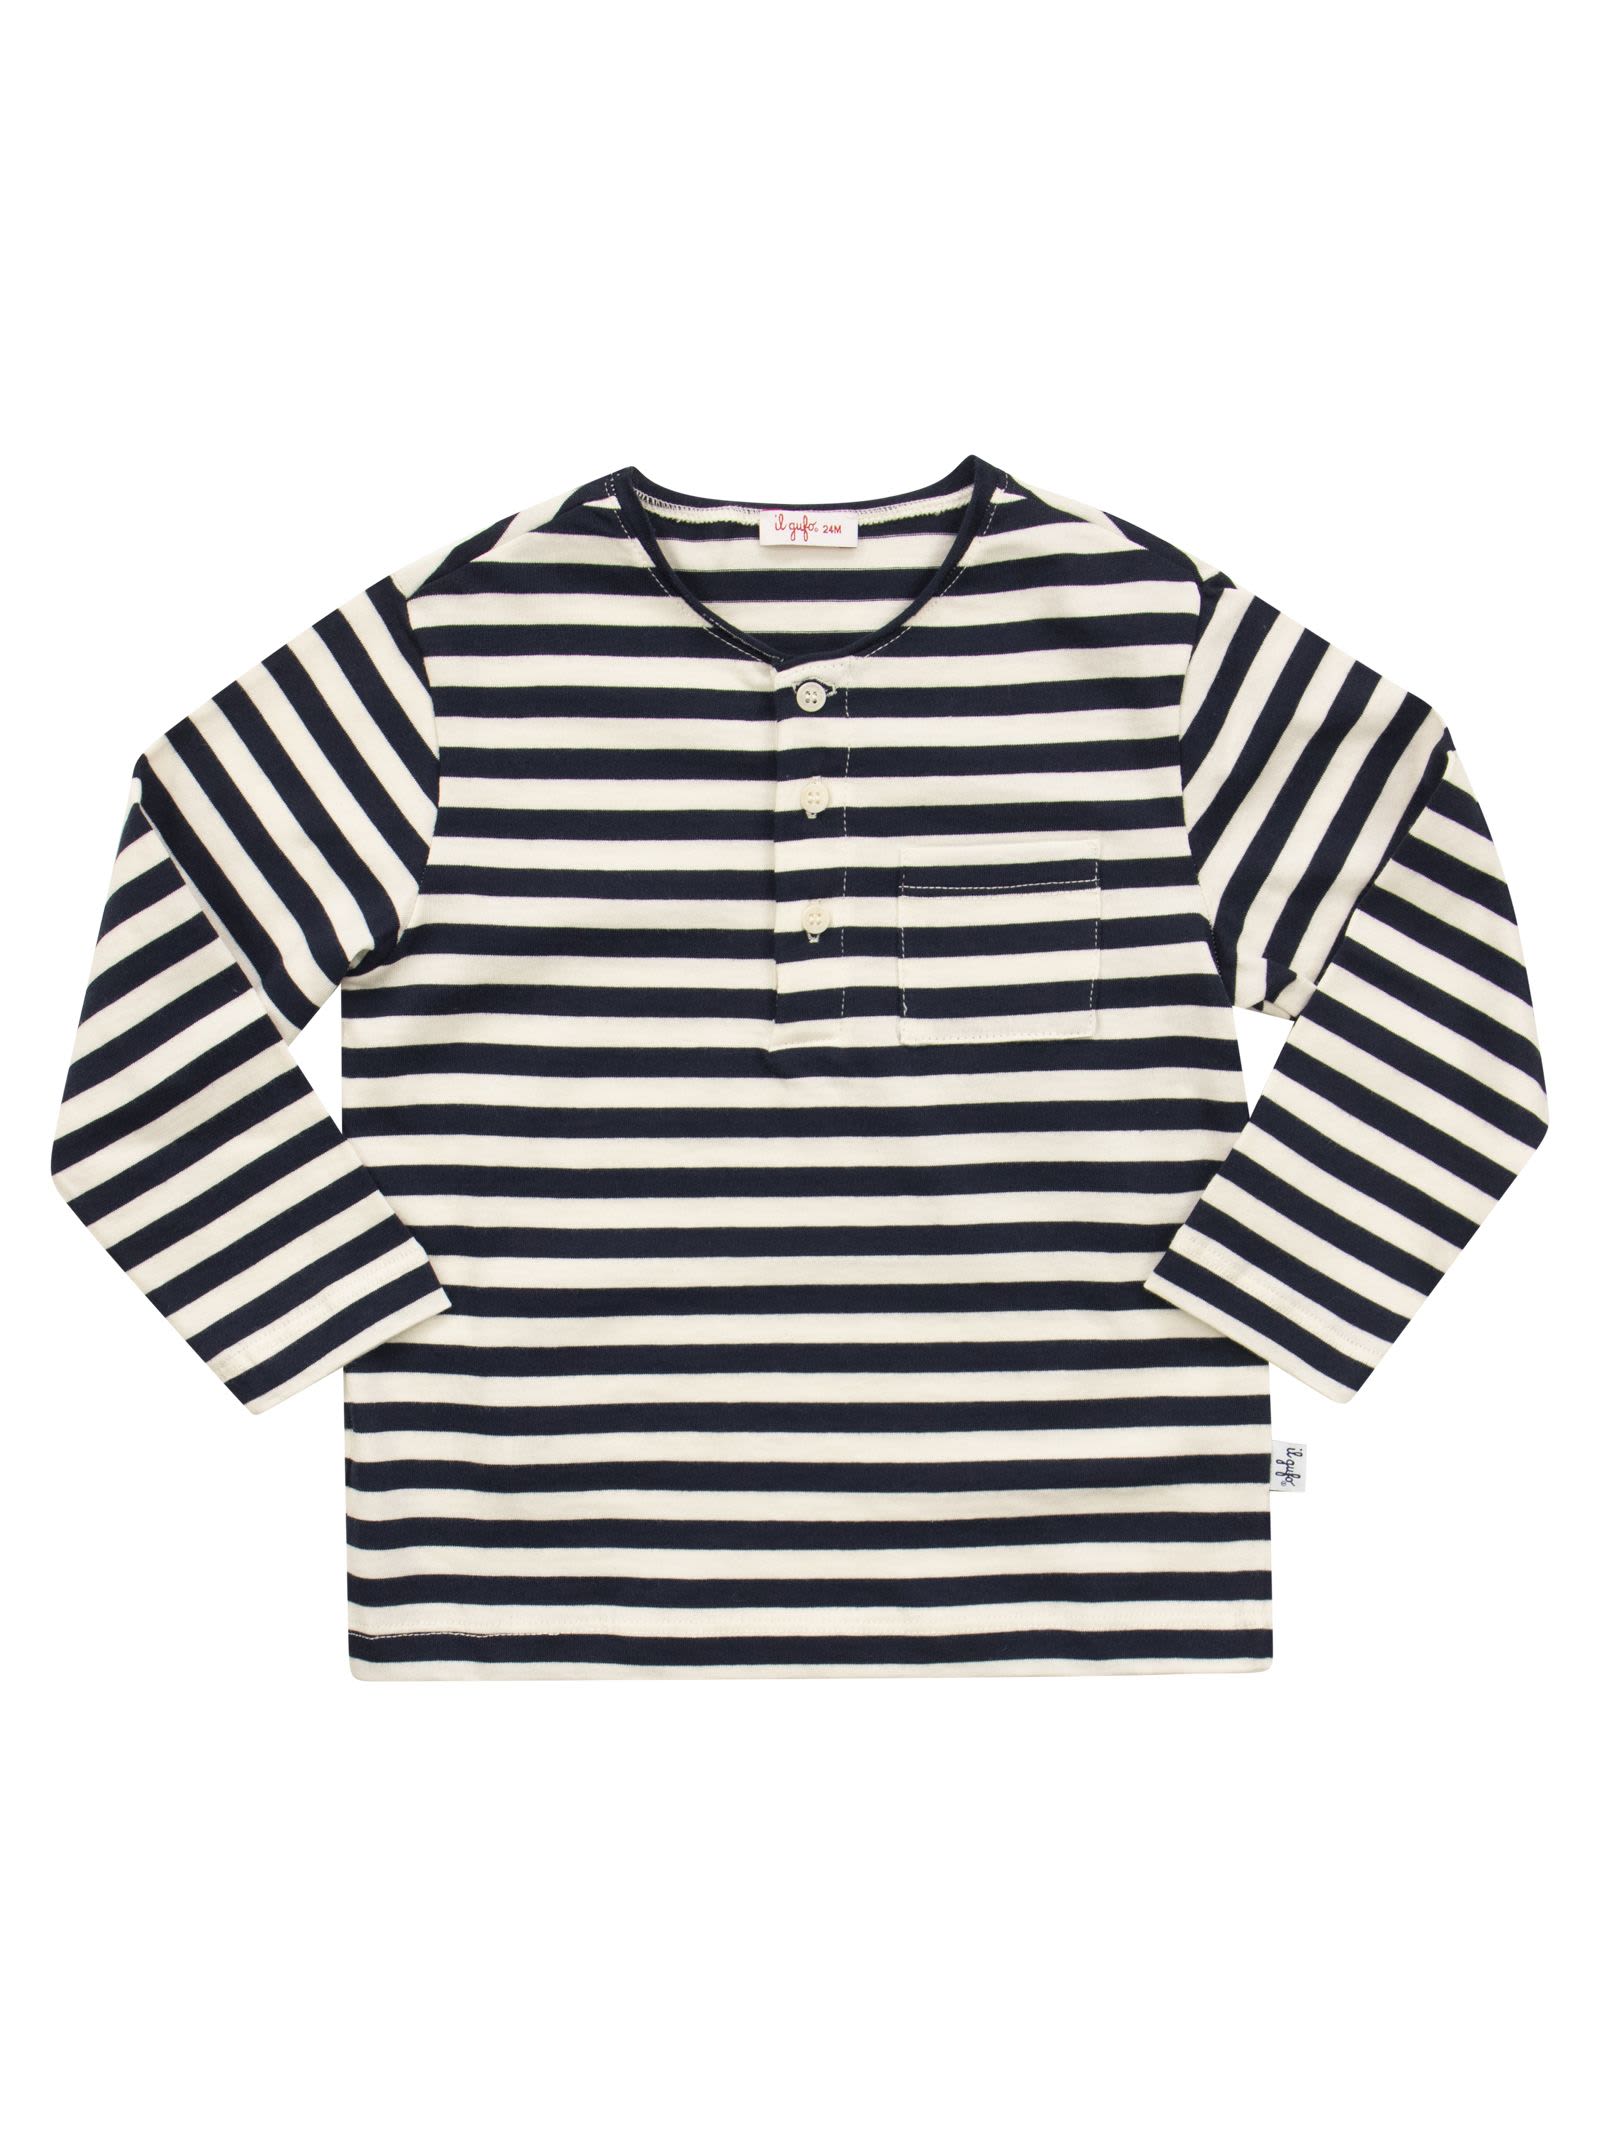 IL GUFO STRIPED T-SHIRT WITH LONG SLEEVES